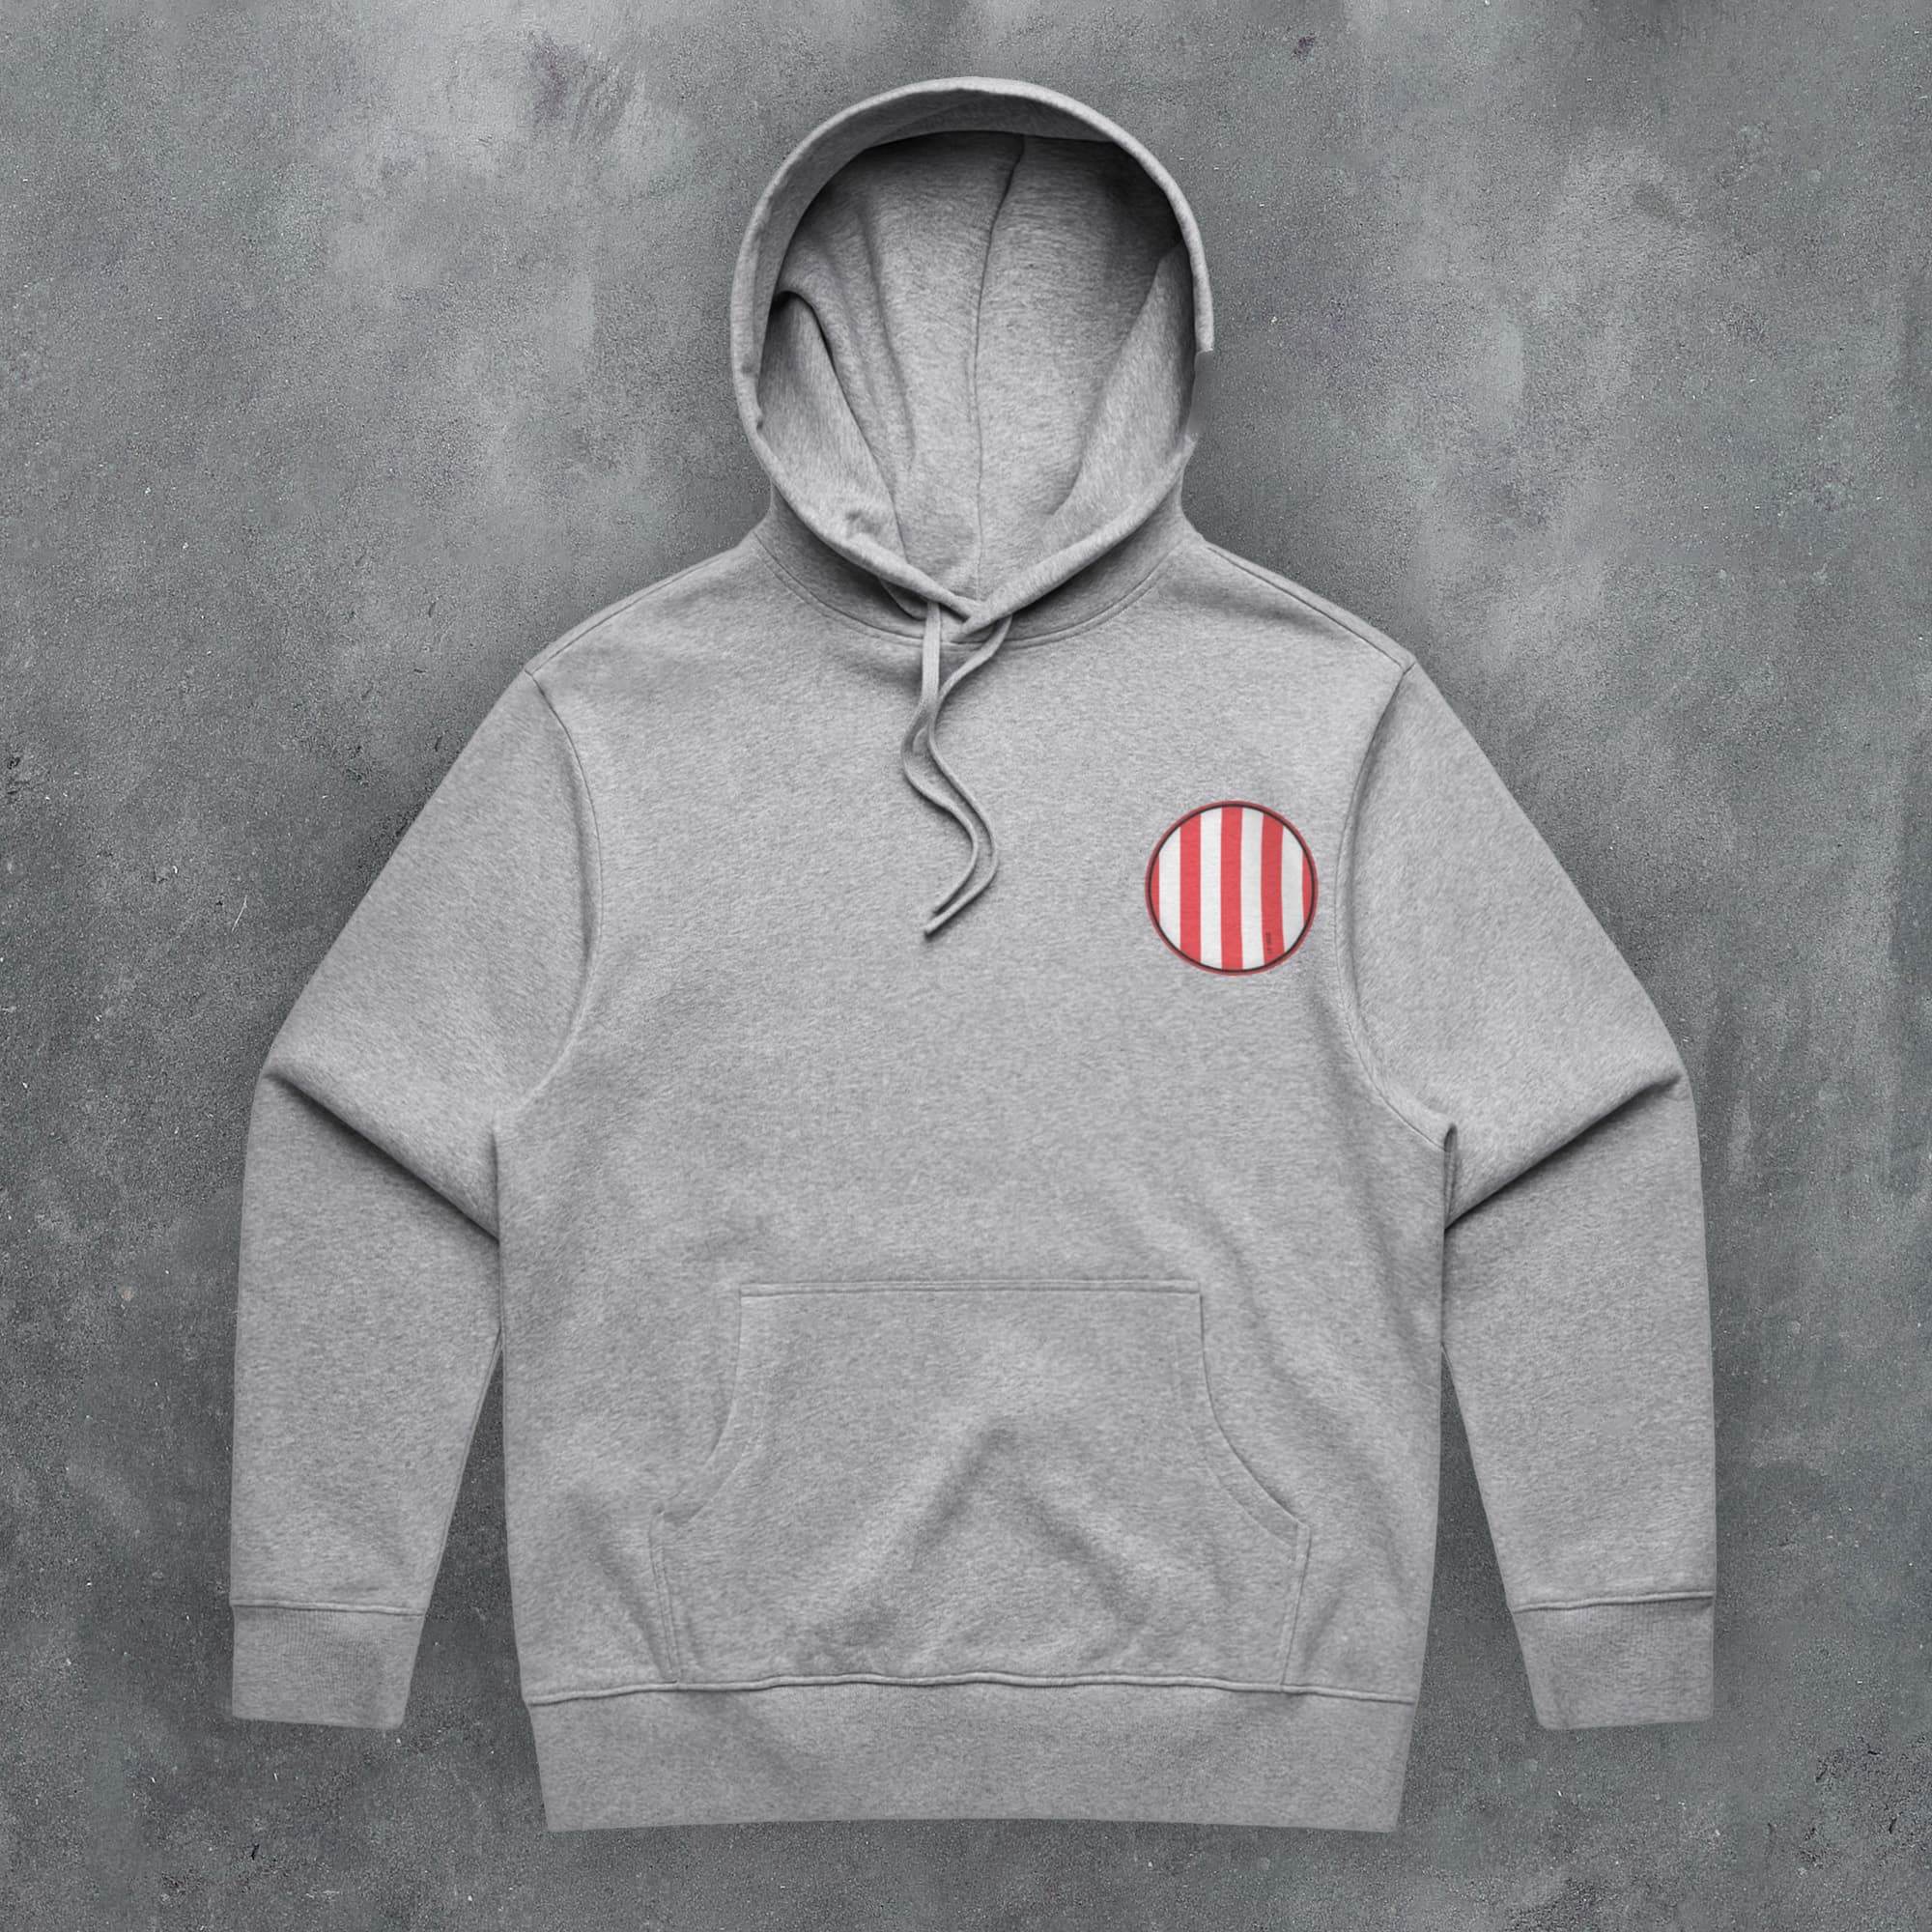 a grey hoodie with a red and white stripe on it